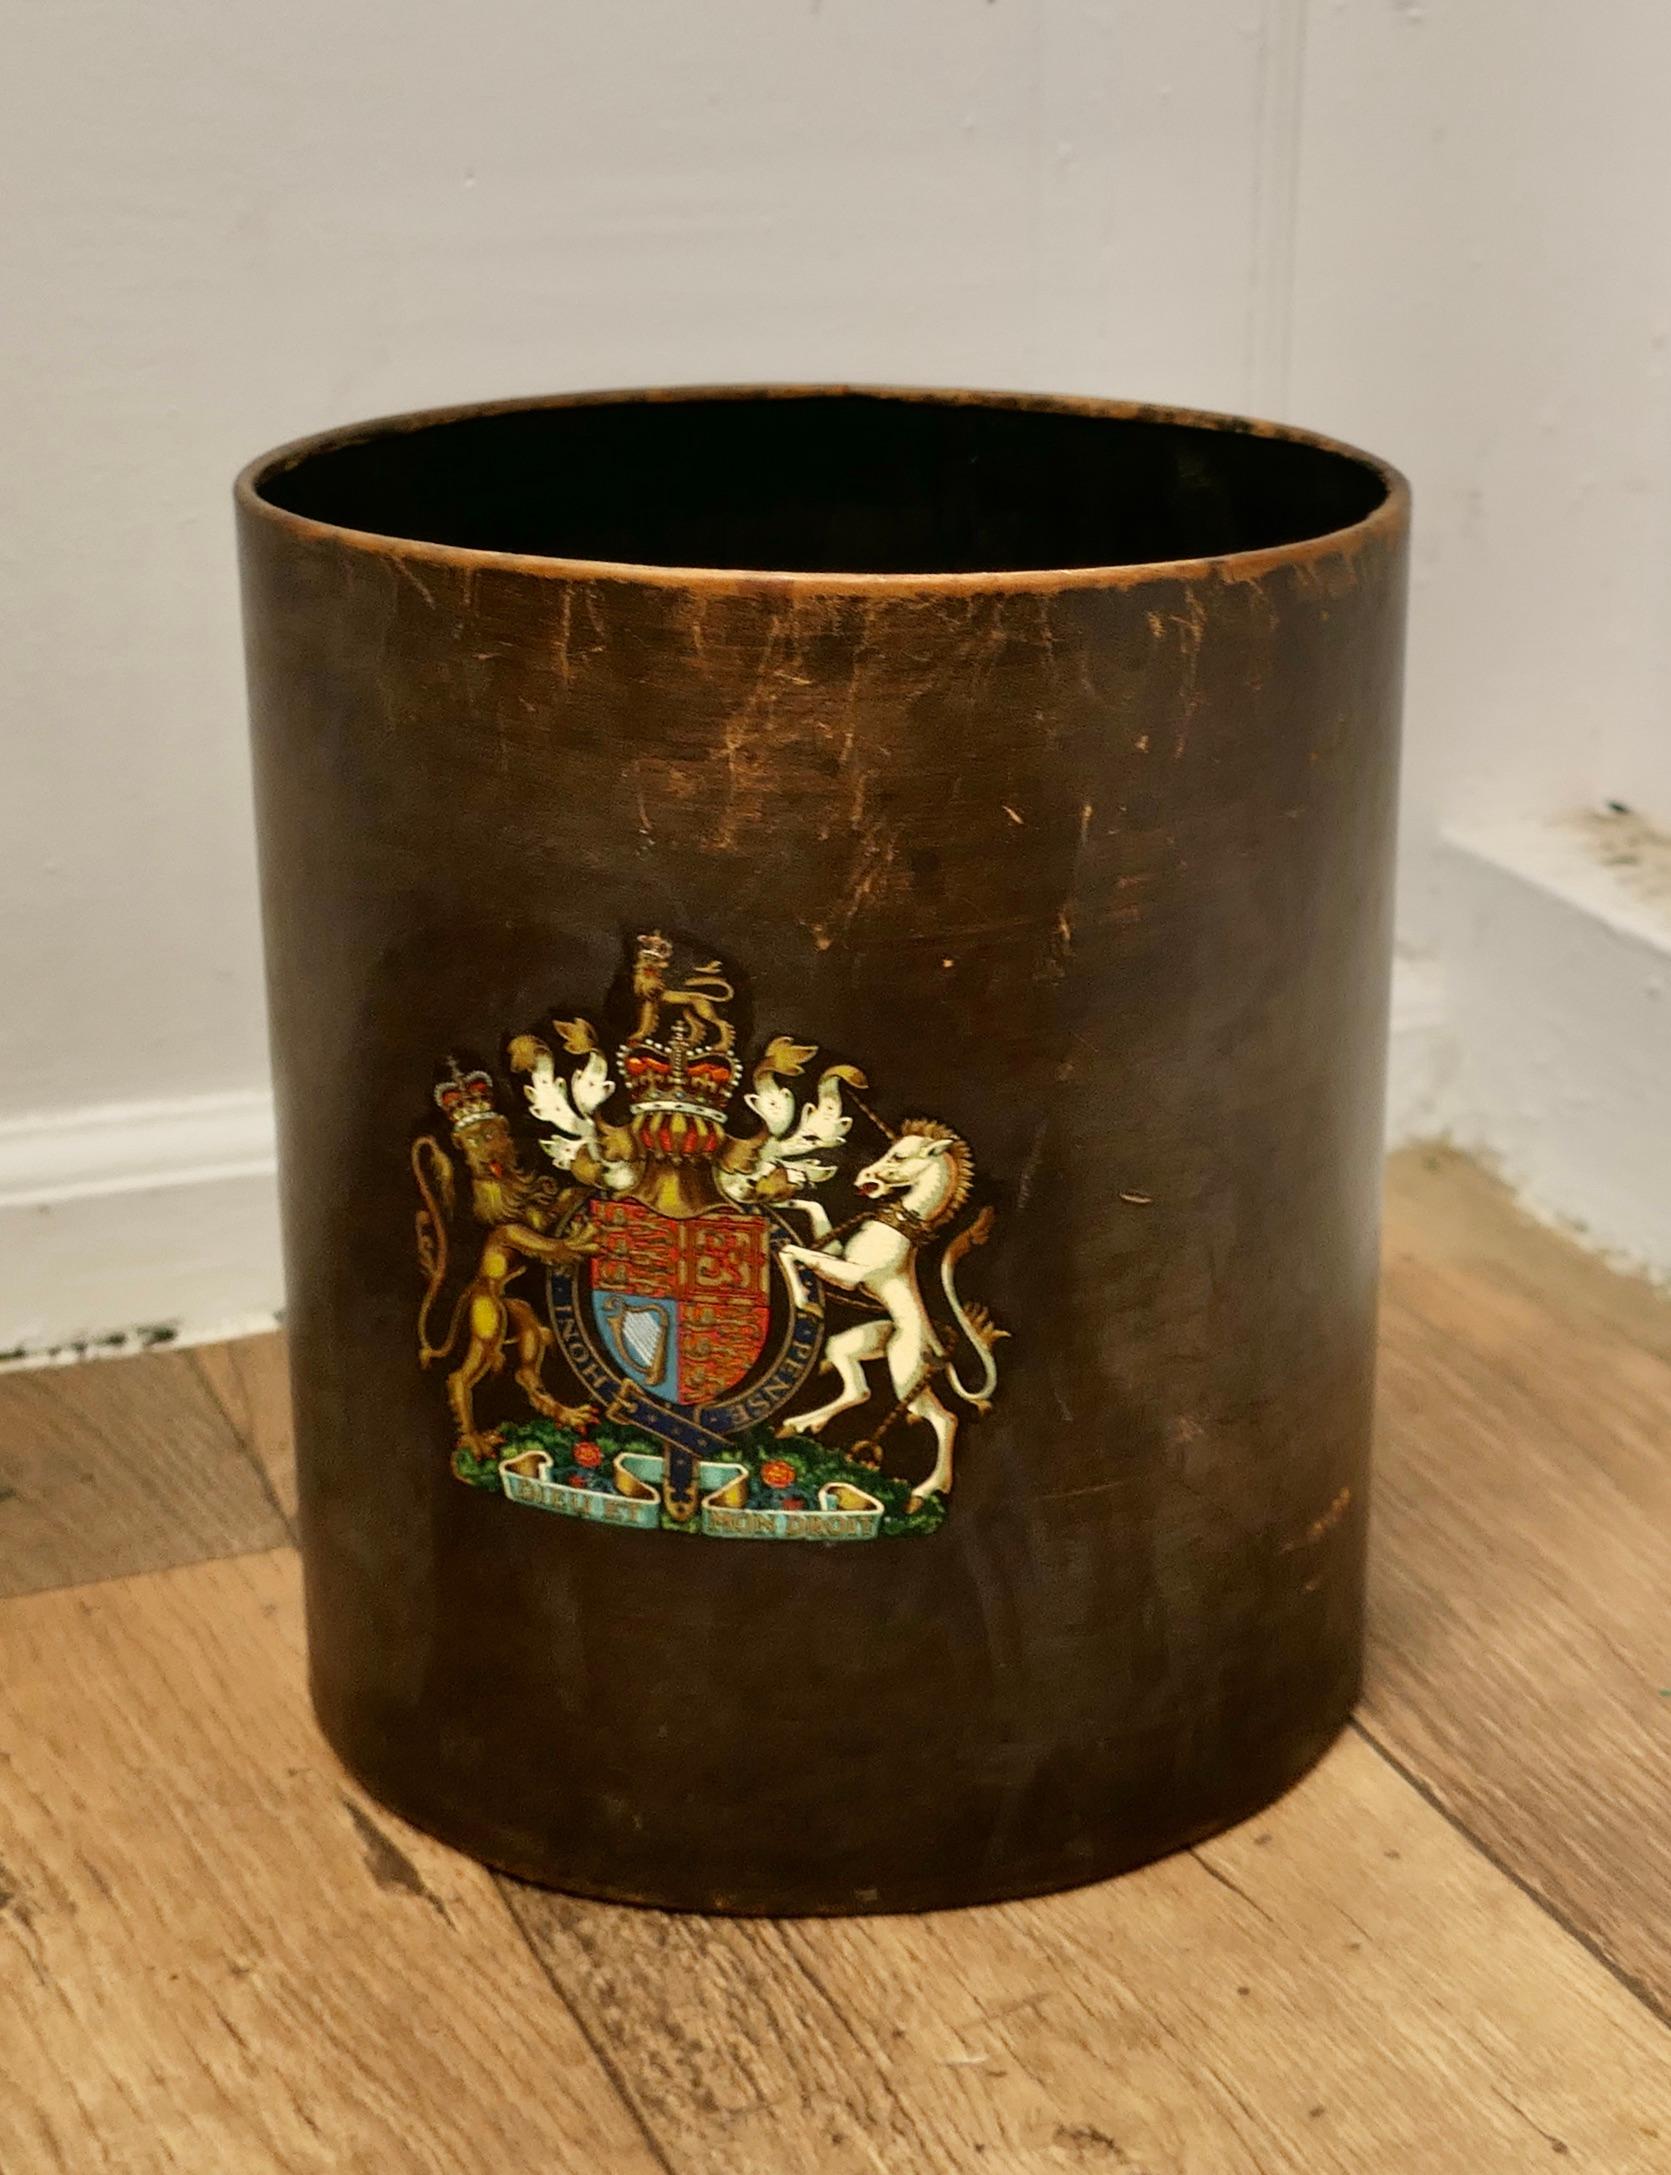 Leather Coat of Arms Waste Paper Basket

The basket is made in leather with the Royal Crest, it is a super looking piece and will enhance any study

The basket is 11” high and 10” in diameter and in good used condition
SW309
